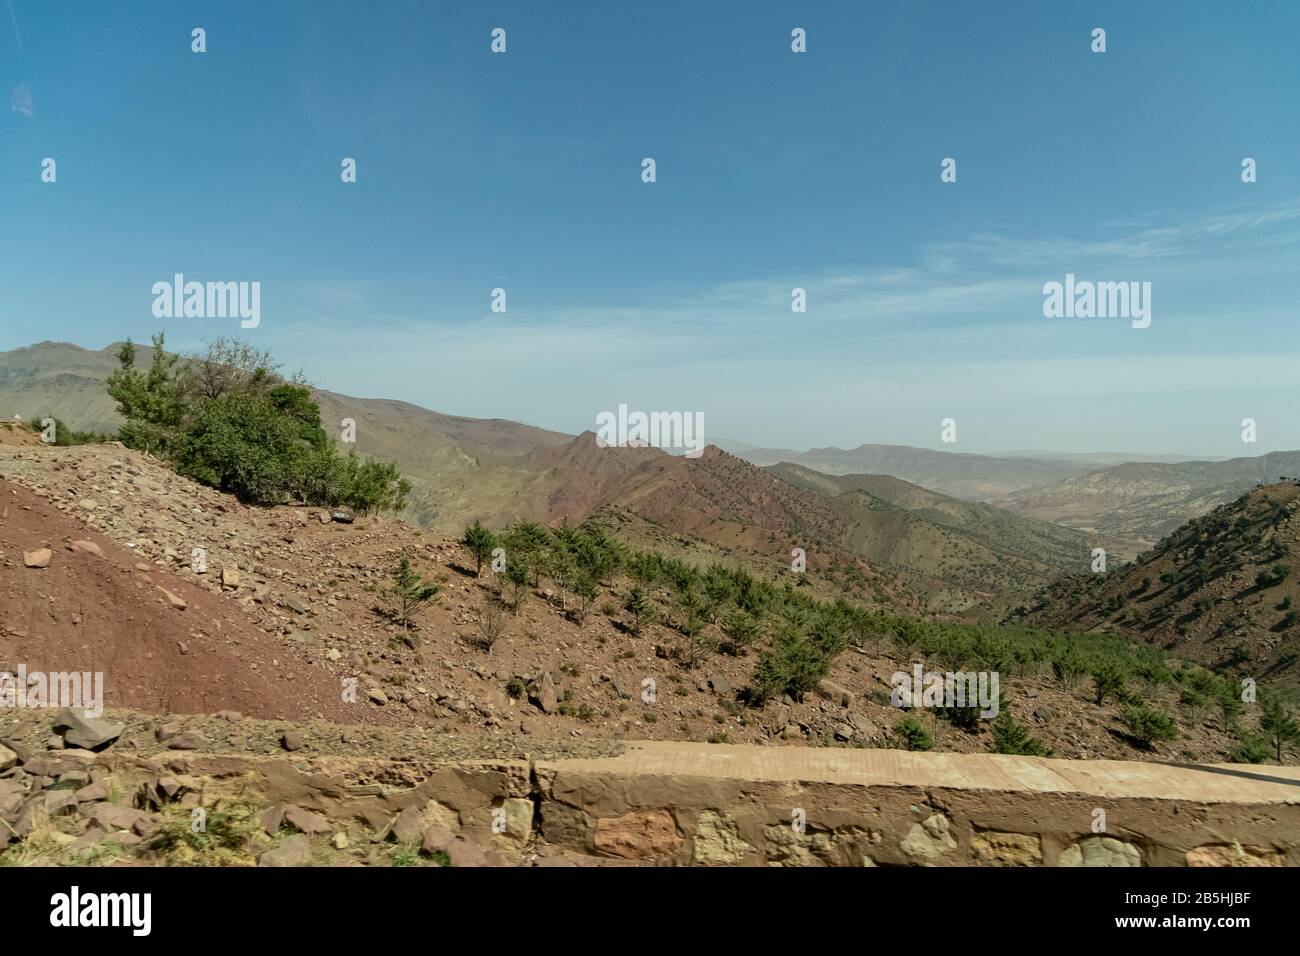 Arid landscape of the high atlas in Morocco Stock Photo